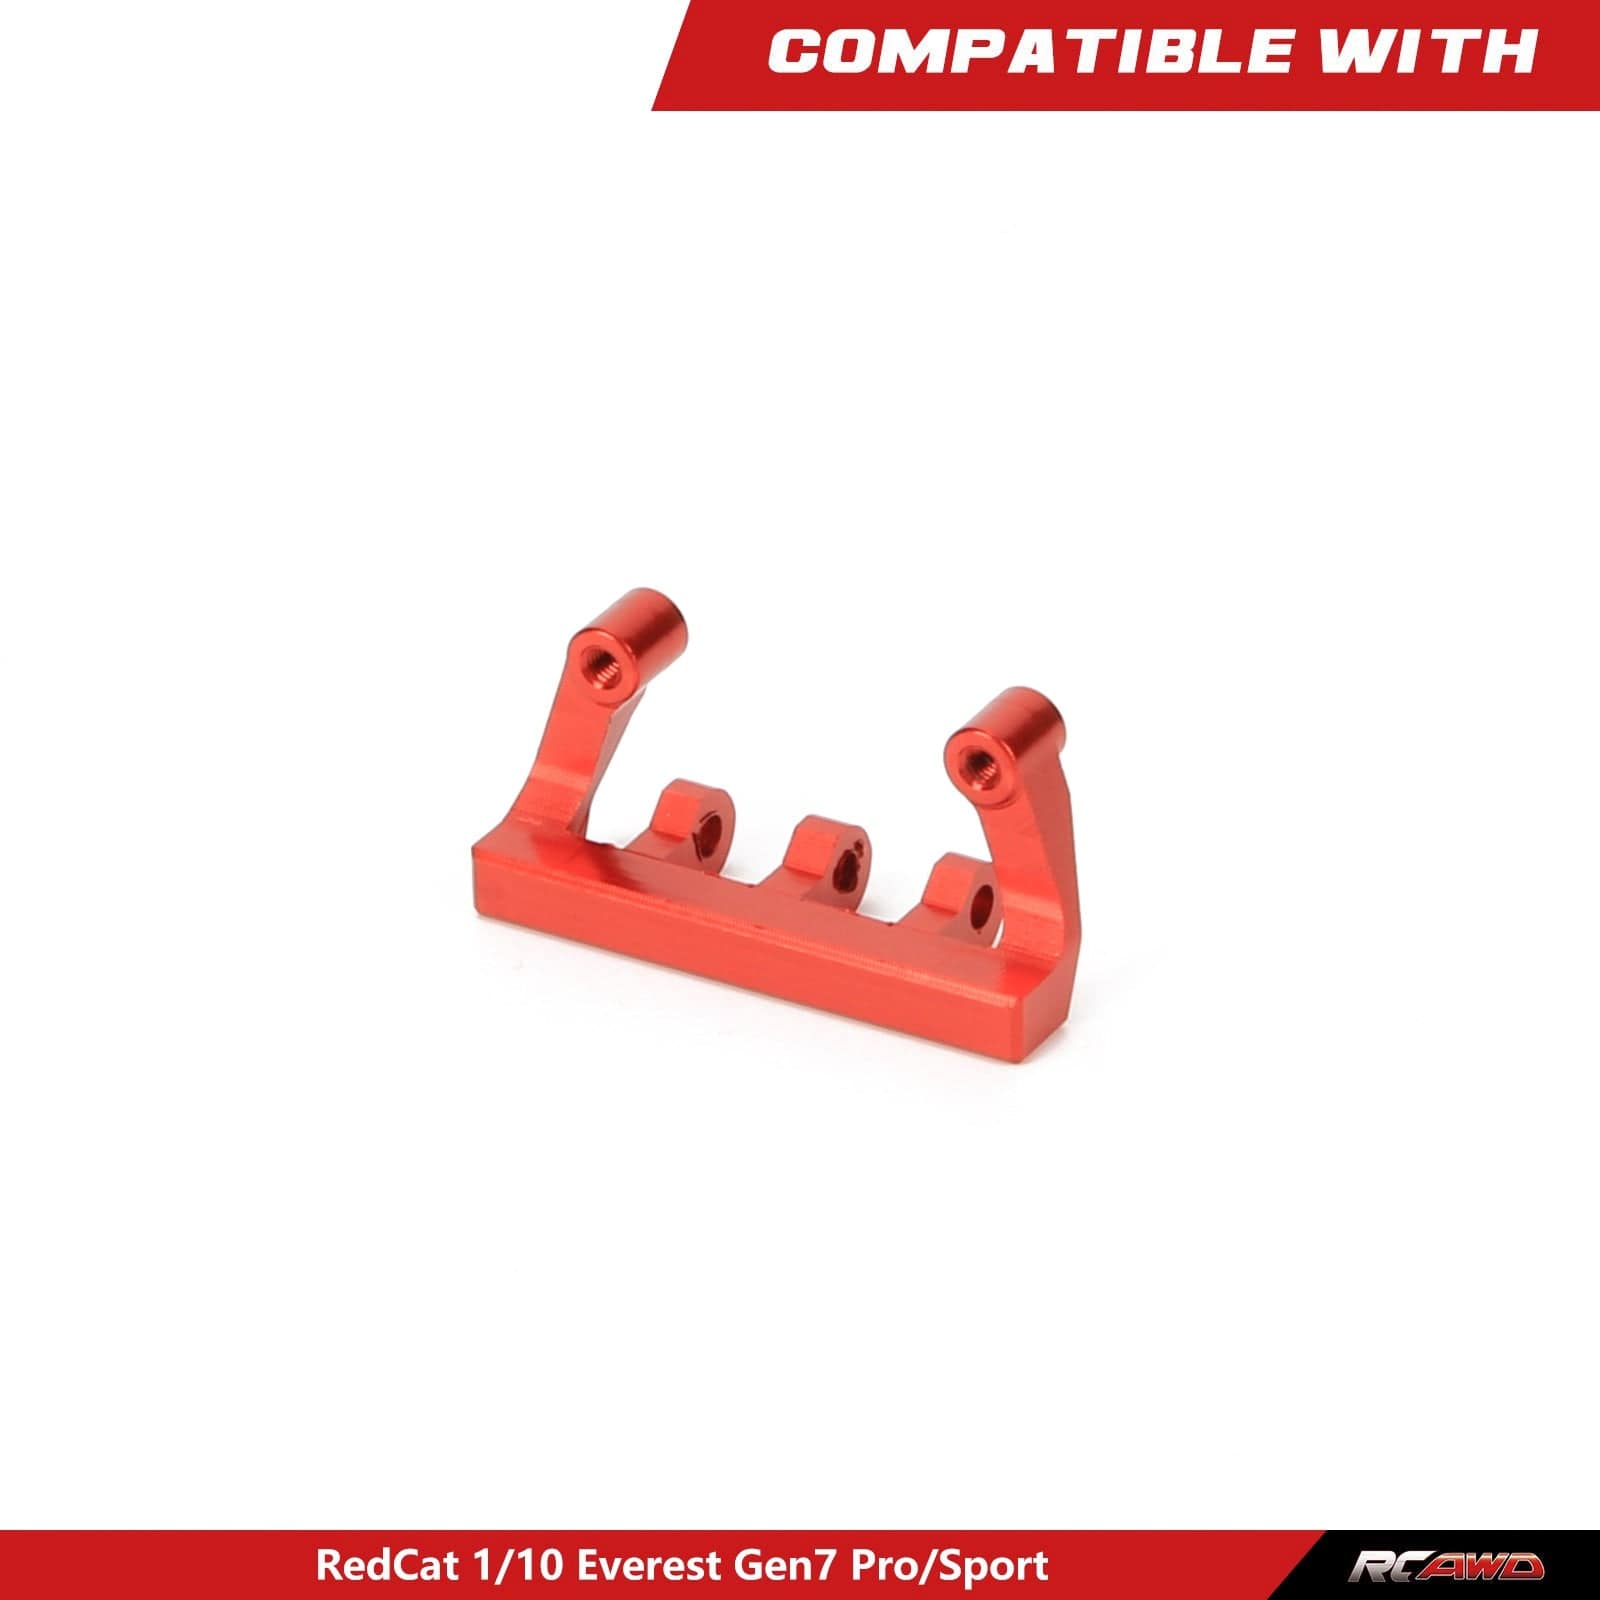 RCAWD Redcat Everest Gen7 Upgrade Chassis Support Rod Holder 13806 - RCAWD